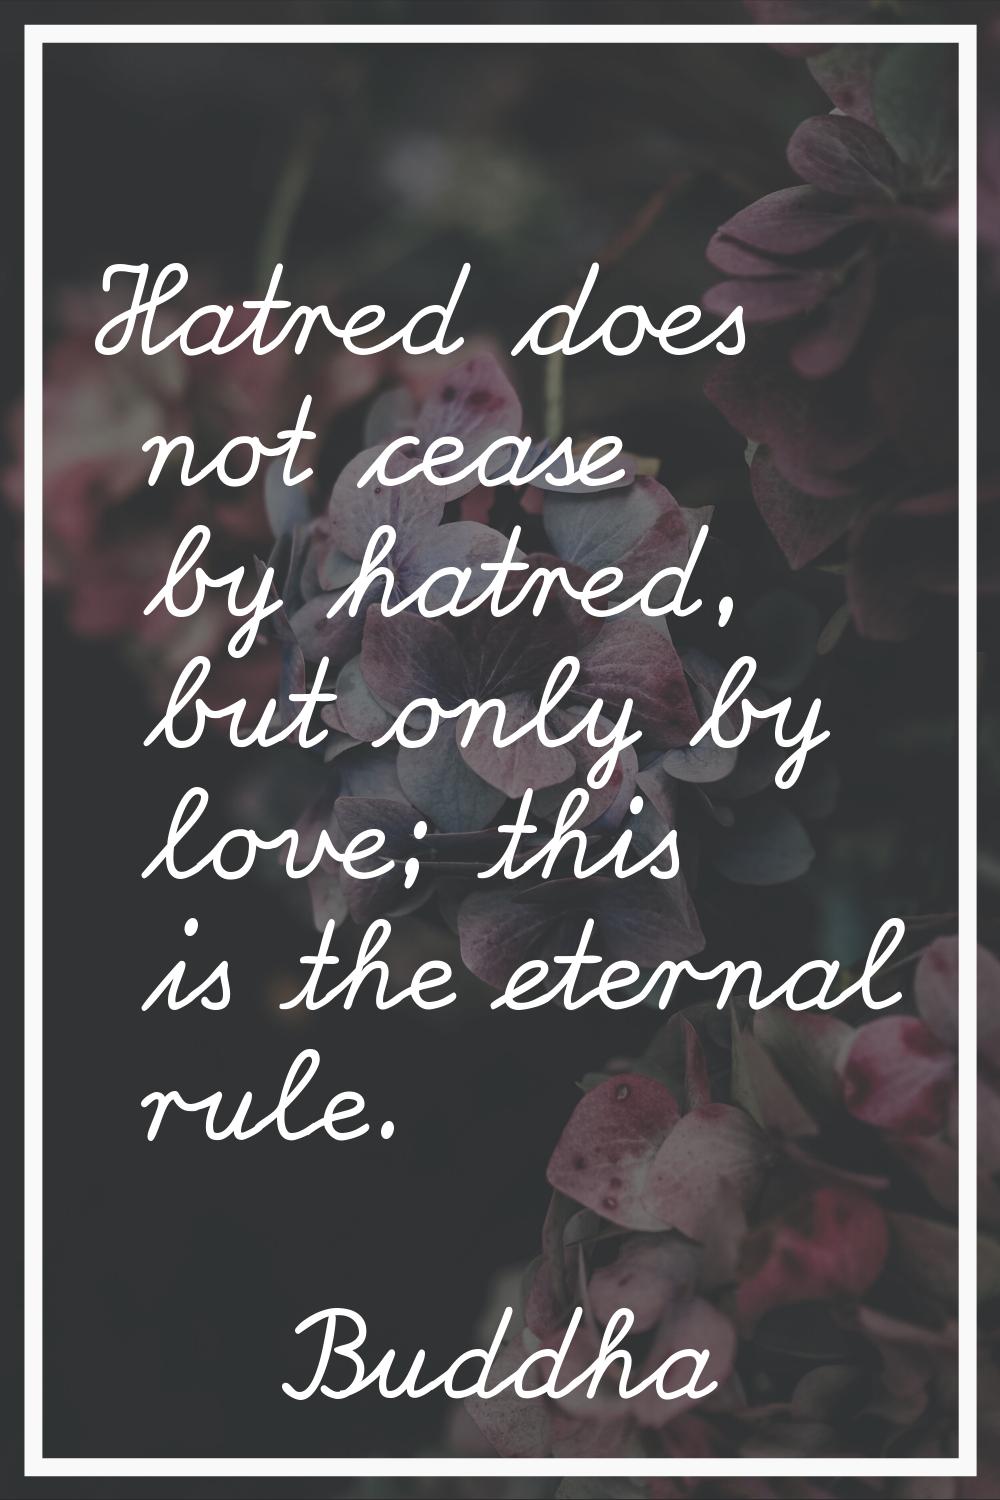 Hatred does not cease by hatred, but only by love; this is the eternal rule.